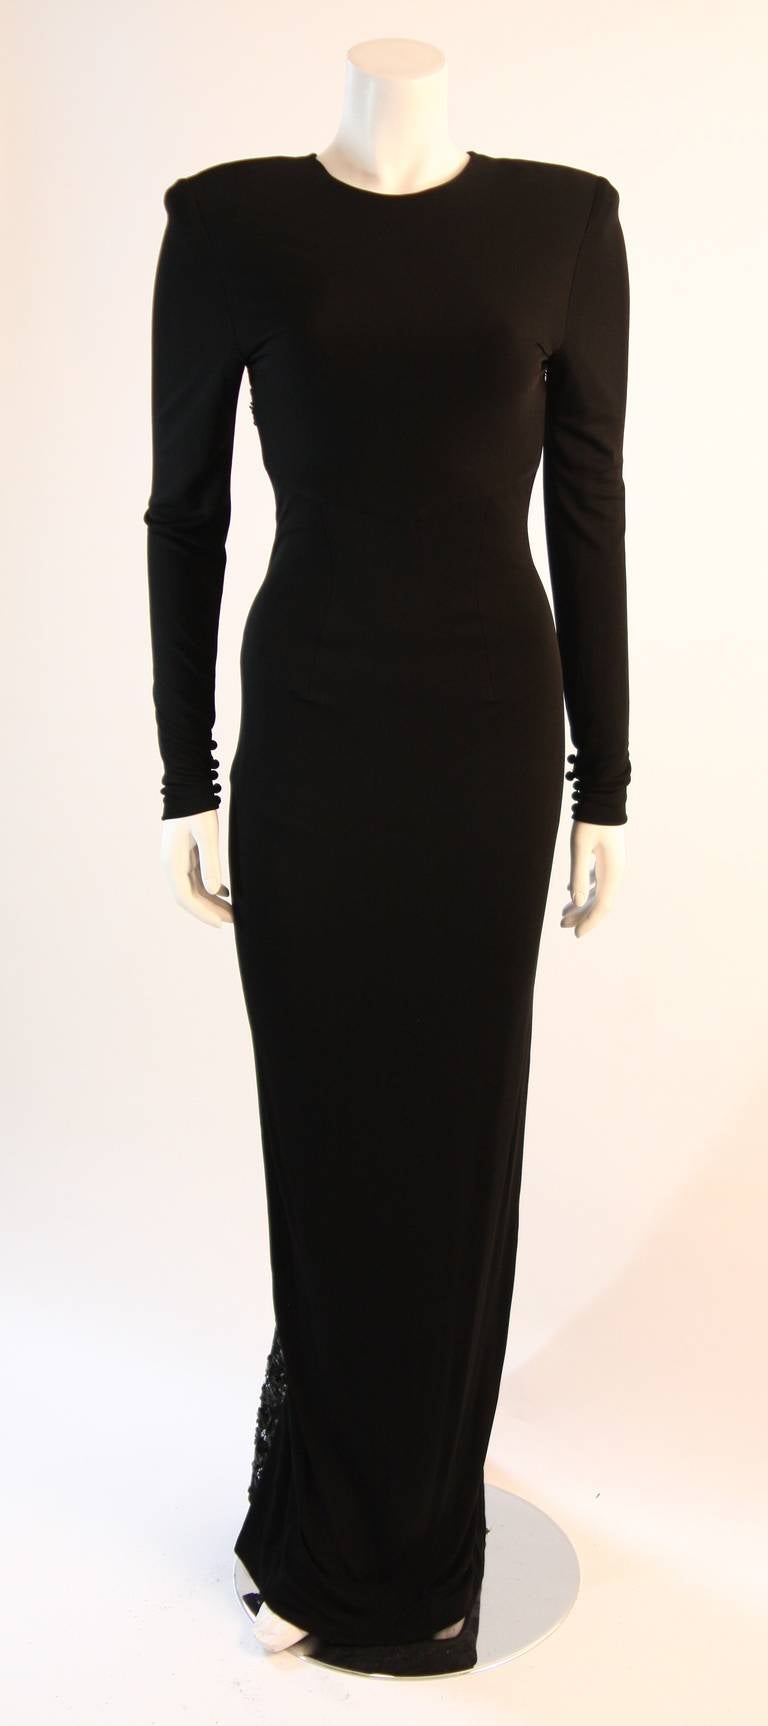 This is a superb Vicky Tiel gown. This gown is composed of a black stretch jersey and features an embellished lace back with the perfect amount of exposure, a stunning contrast to the sleek high neckline and long sleeves. Cascading just behind the